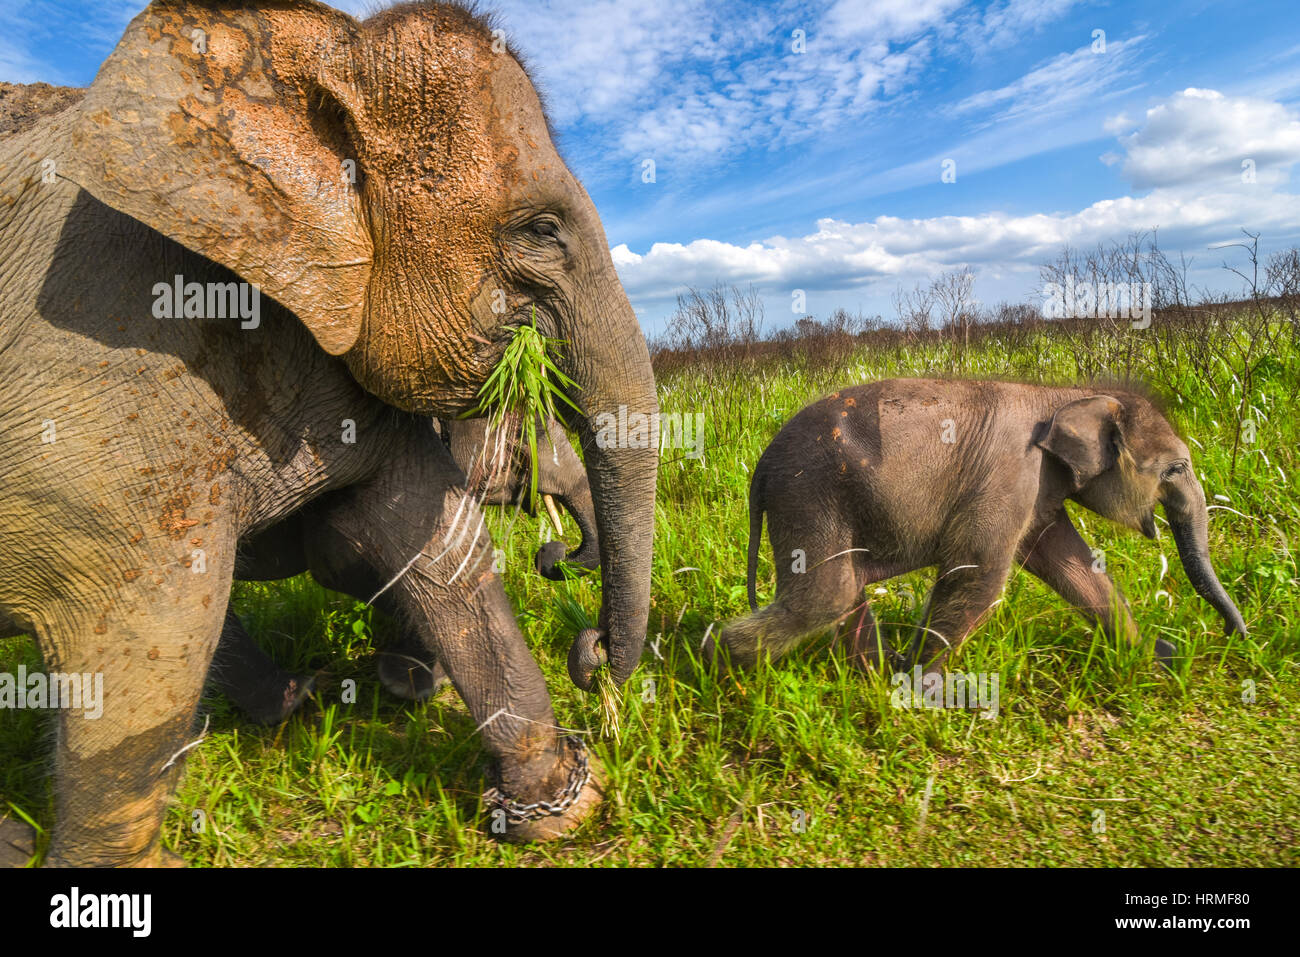 A Sumatran elephant baby walking in front of its herd in the grazing land of Way Kambas National Park, Indonesia. Stock Photo